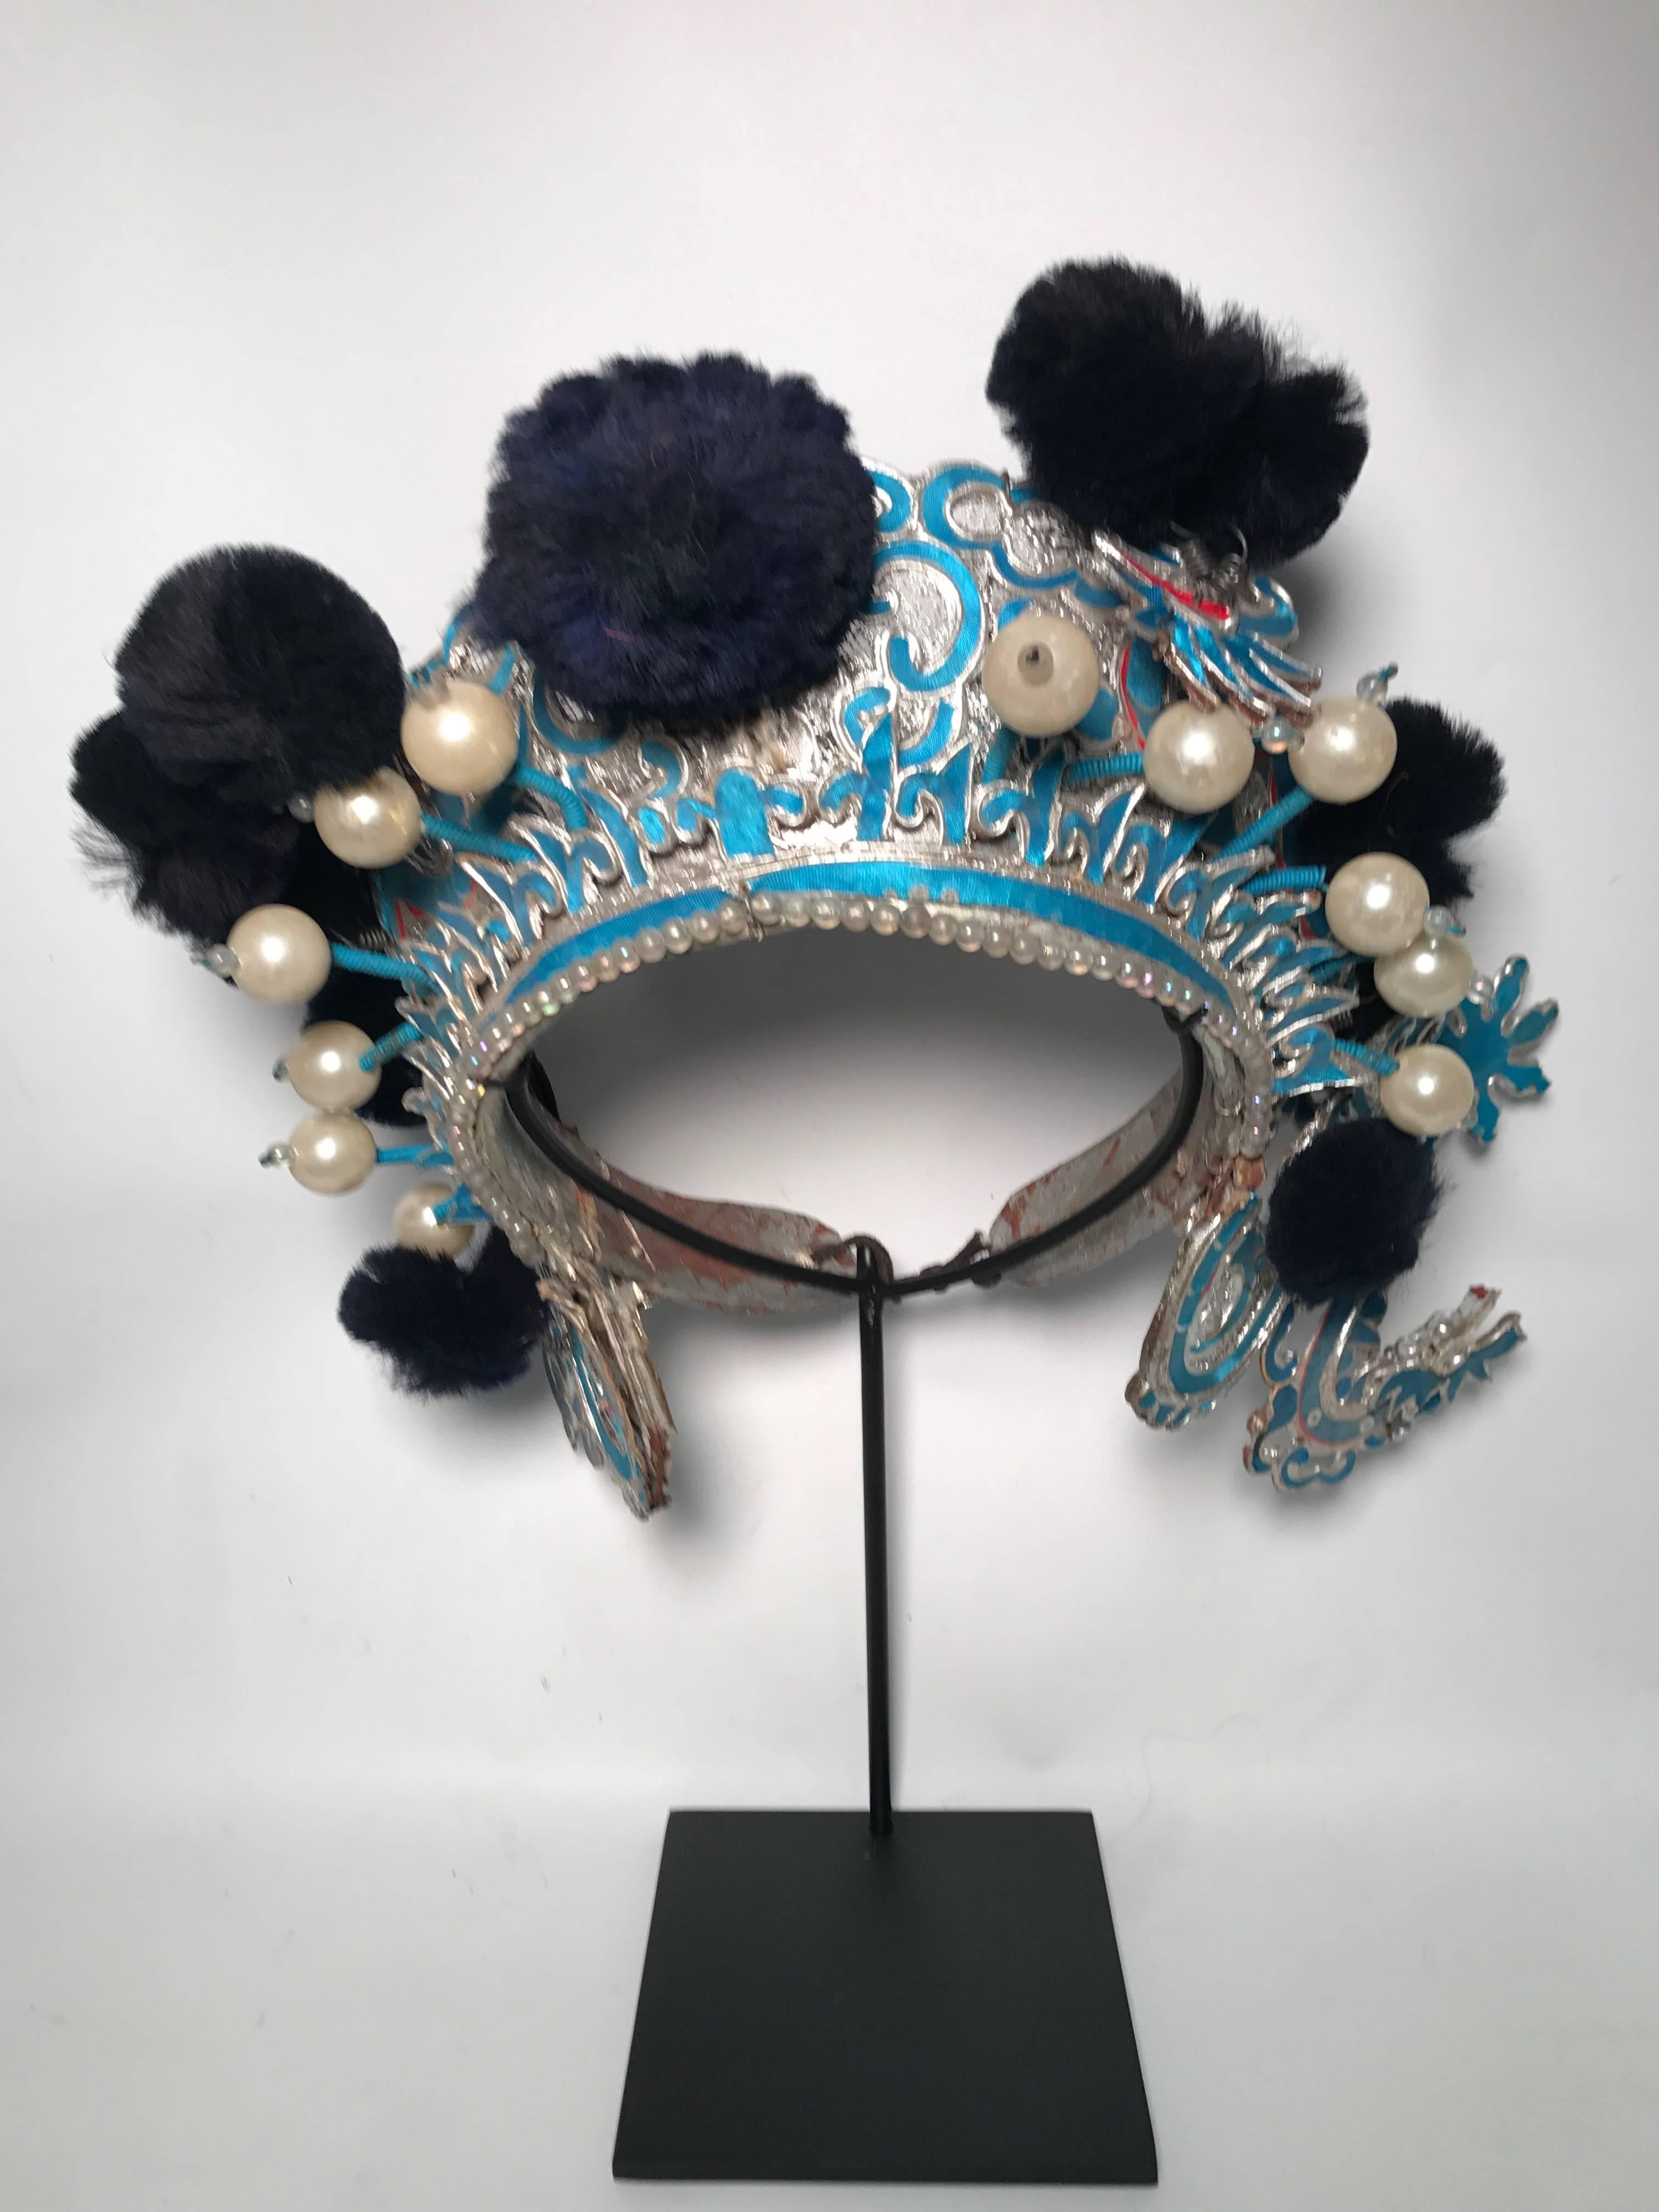 Vintage Chinese Theatre Headdress in Turquoise with Midnight Blue Pom Poms 1